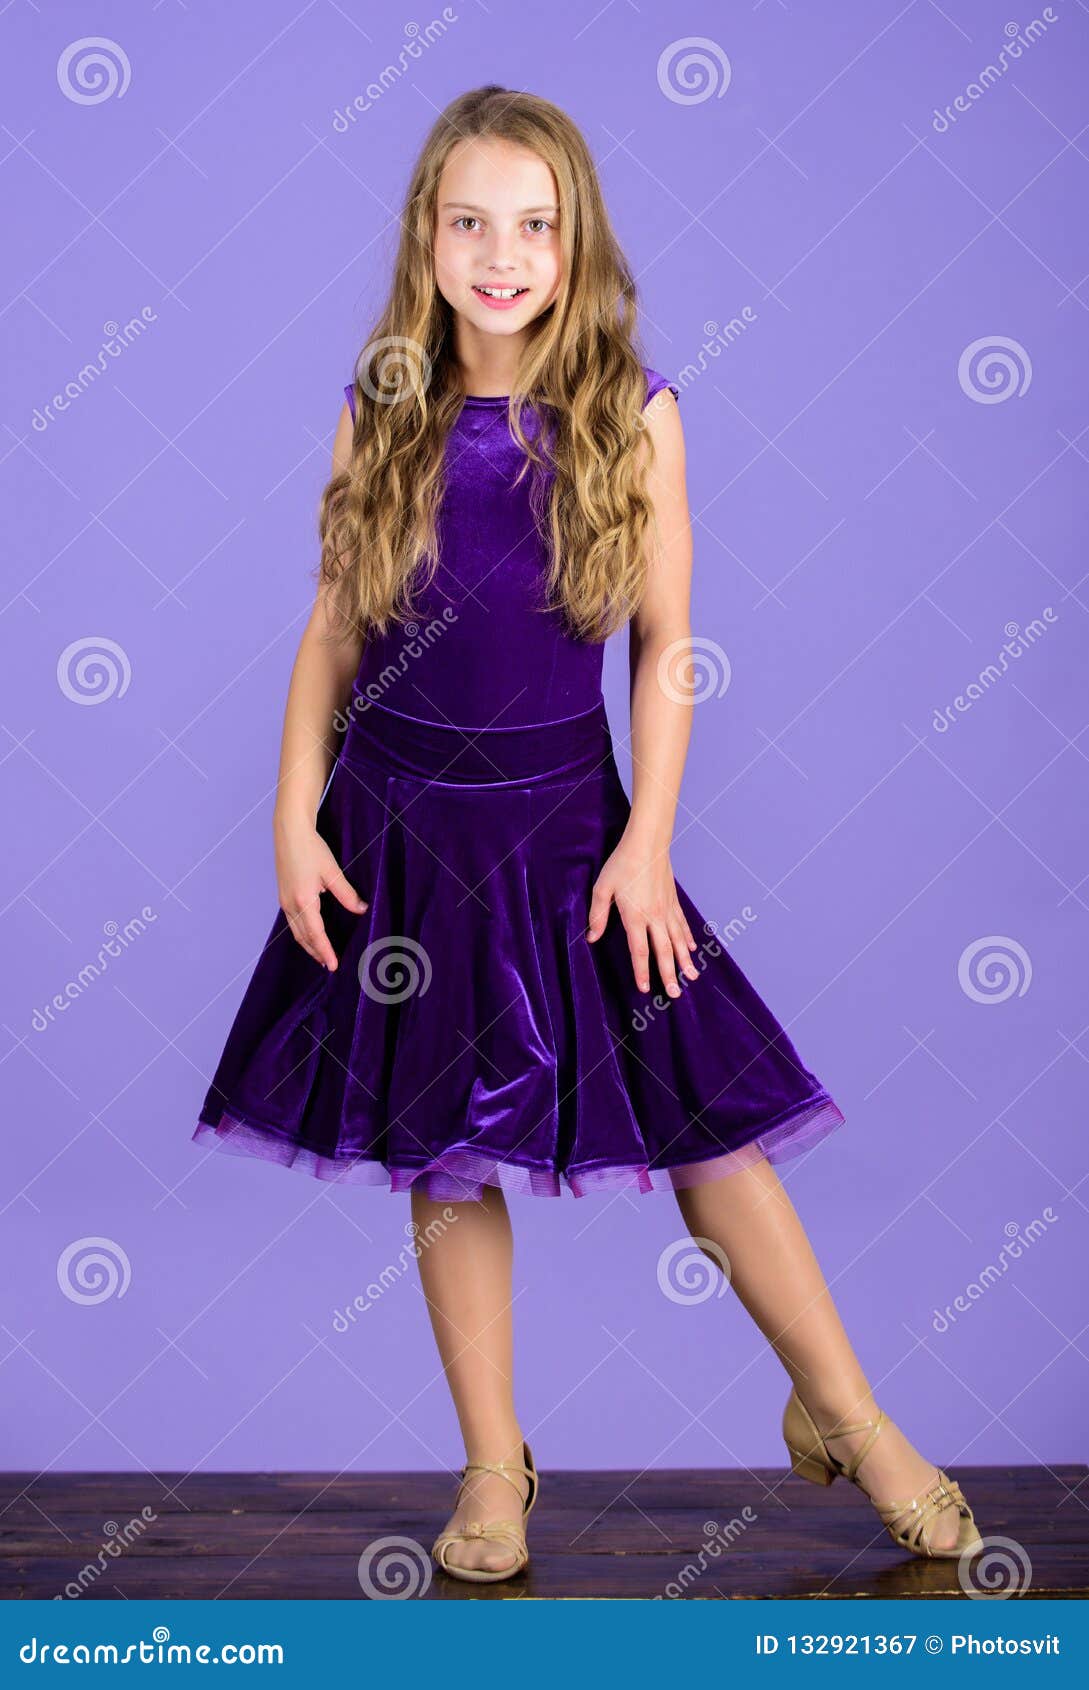 Girl Cute Child Wear Velvet Violet Dress. Clothes for Ballroom Dance. Kid  Fashionable Dress Looks Adorable Stock Image - Image of cheerful, hair:  132921367